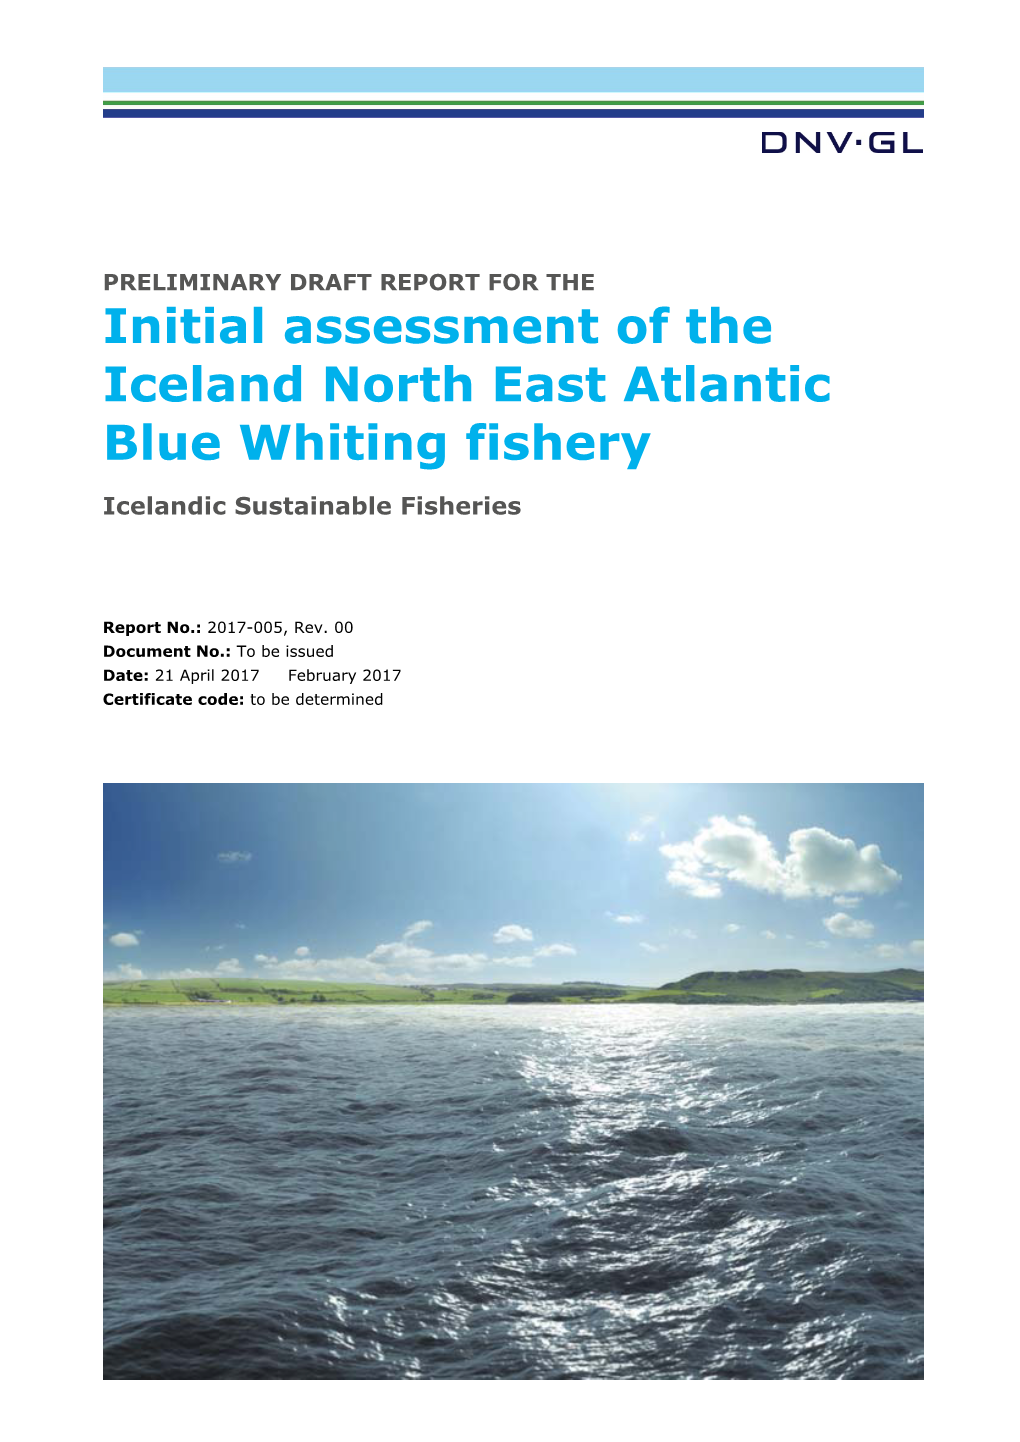 Initial Assessment of the Iceland North East Atlantic Blue Whiting Fishery